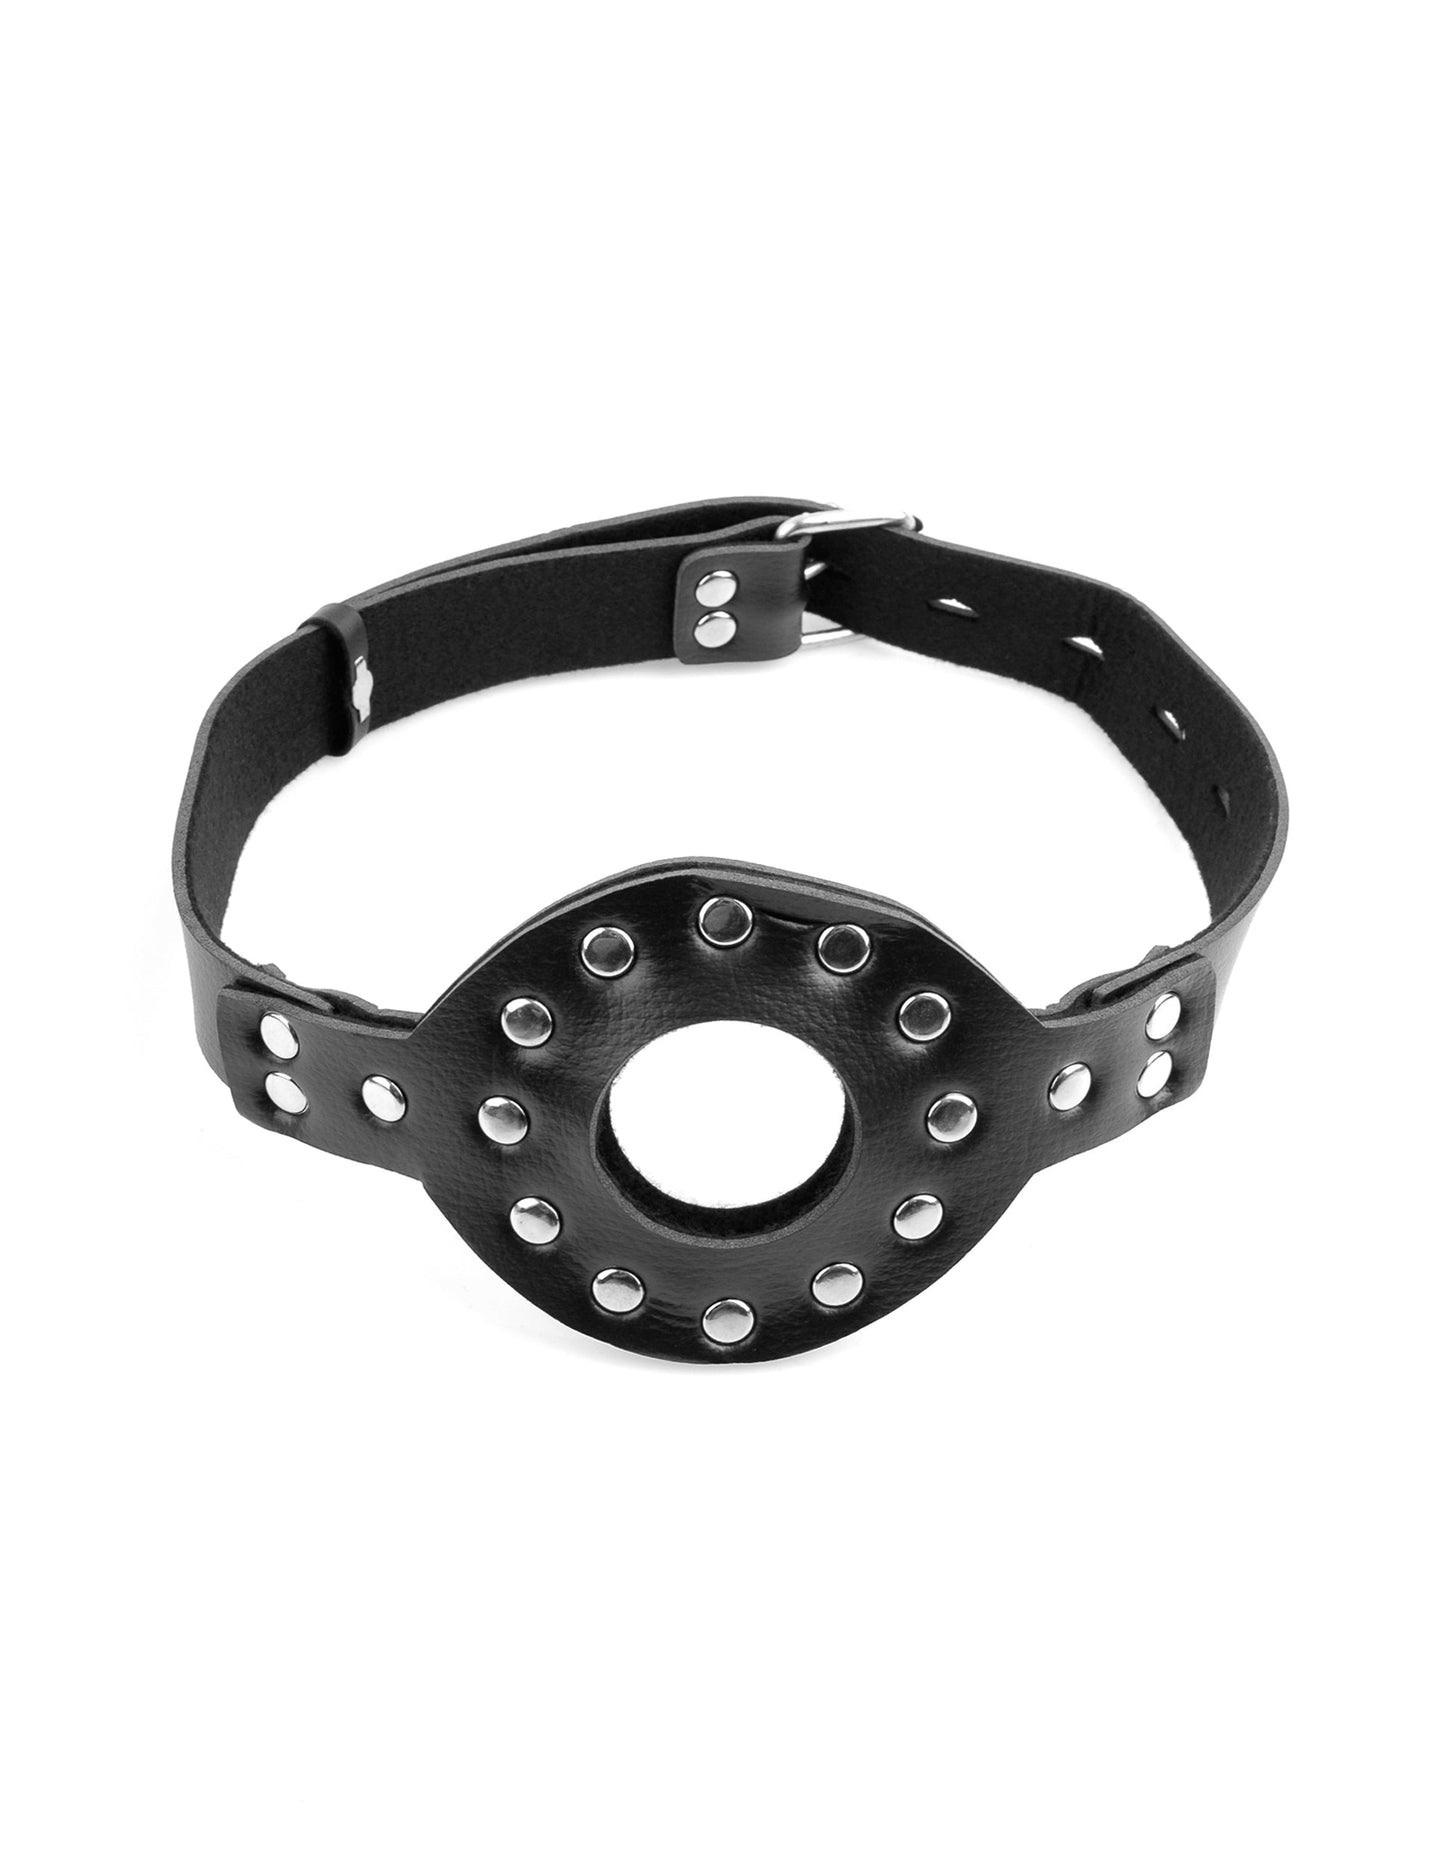 Fetish Fantasy Series Deluxe Ball Gag with Dong by Pipedream